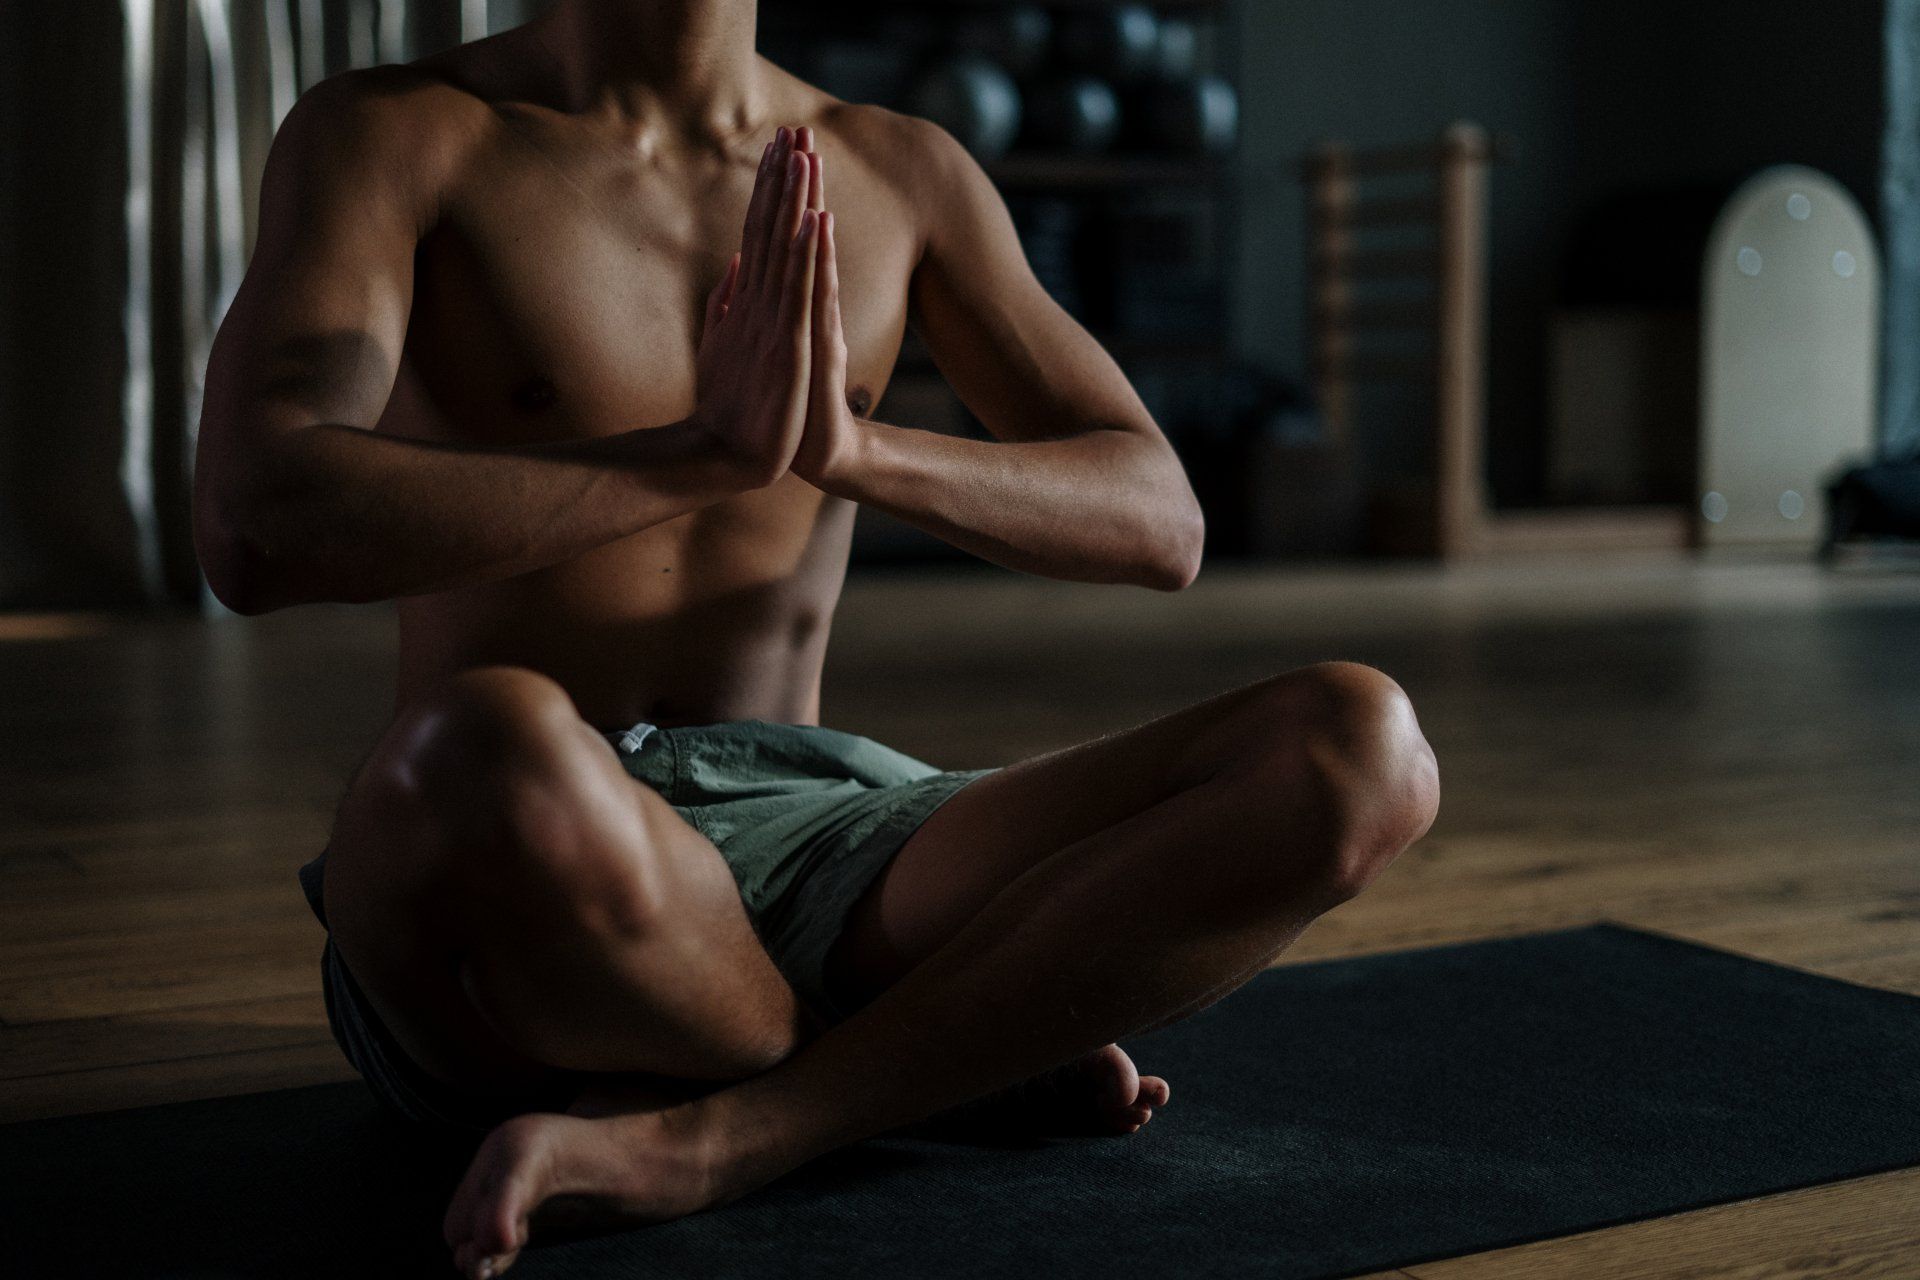 A shirtless man is sitting on a yoga mat with his hands folded in prayer.